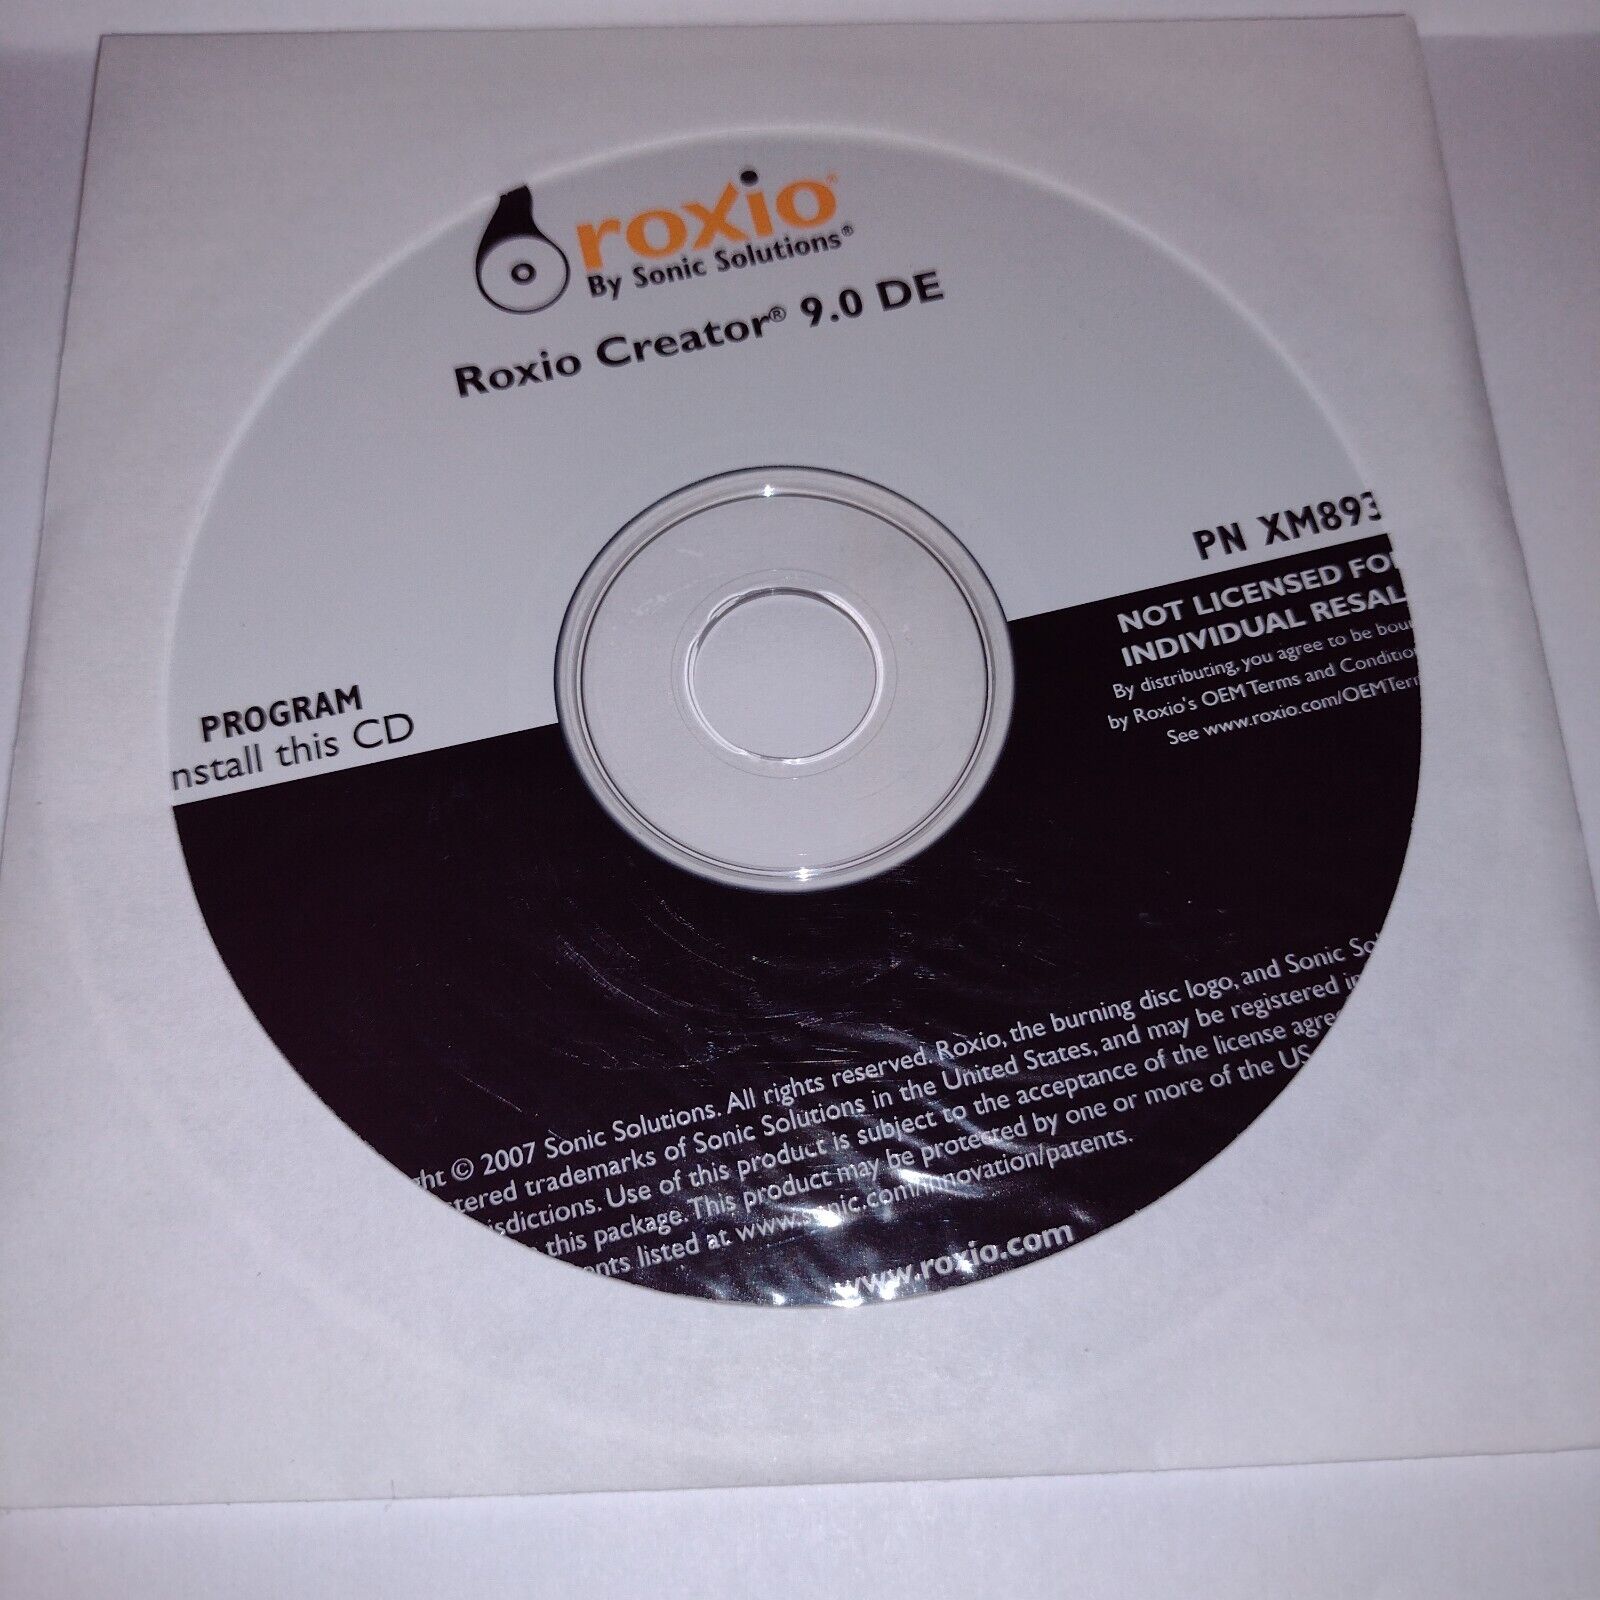 Roxio Creator & MyDVD 9.0 DE Installation CD Used once  only. No scratches.